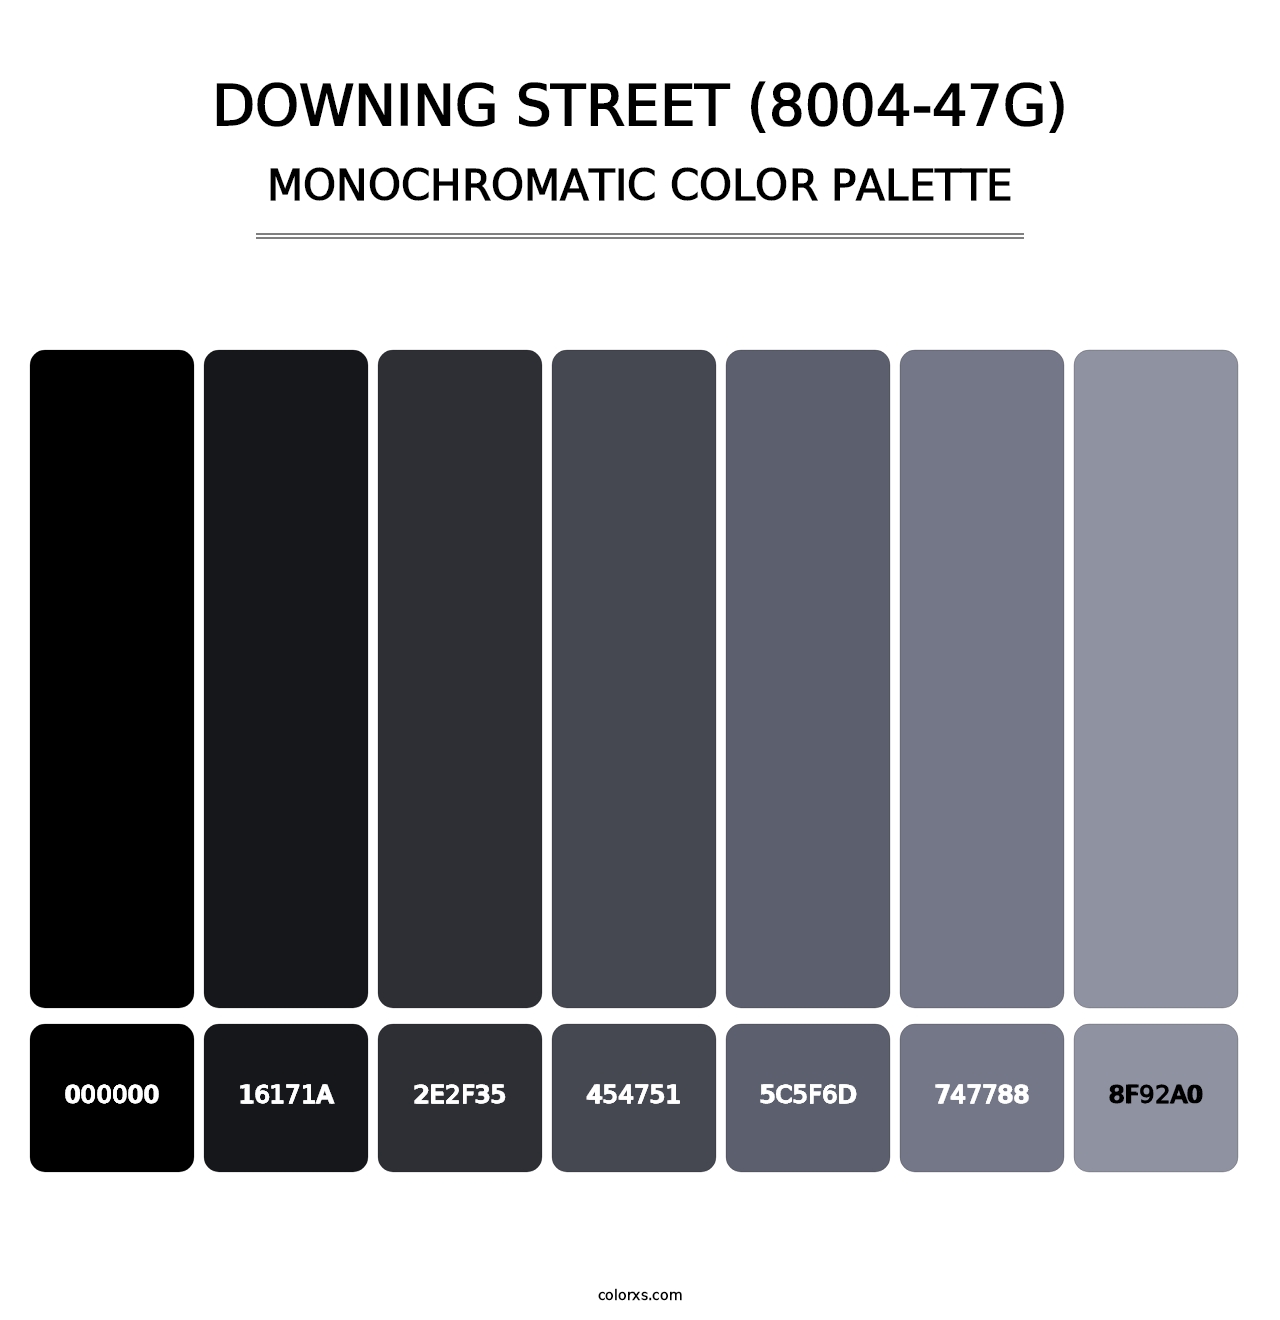 Downing Street (8004-47G) - Monochromatic Color Palette